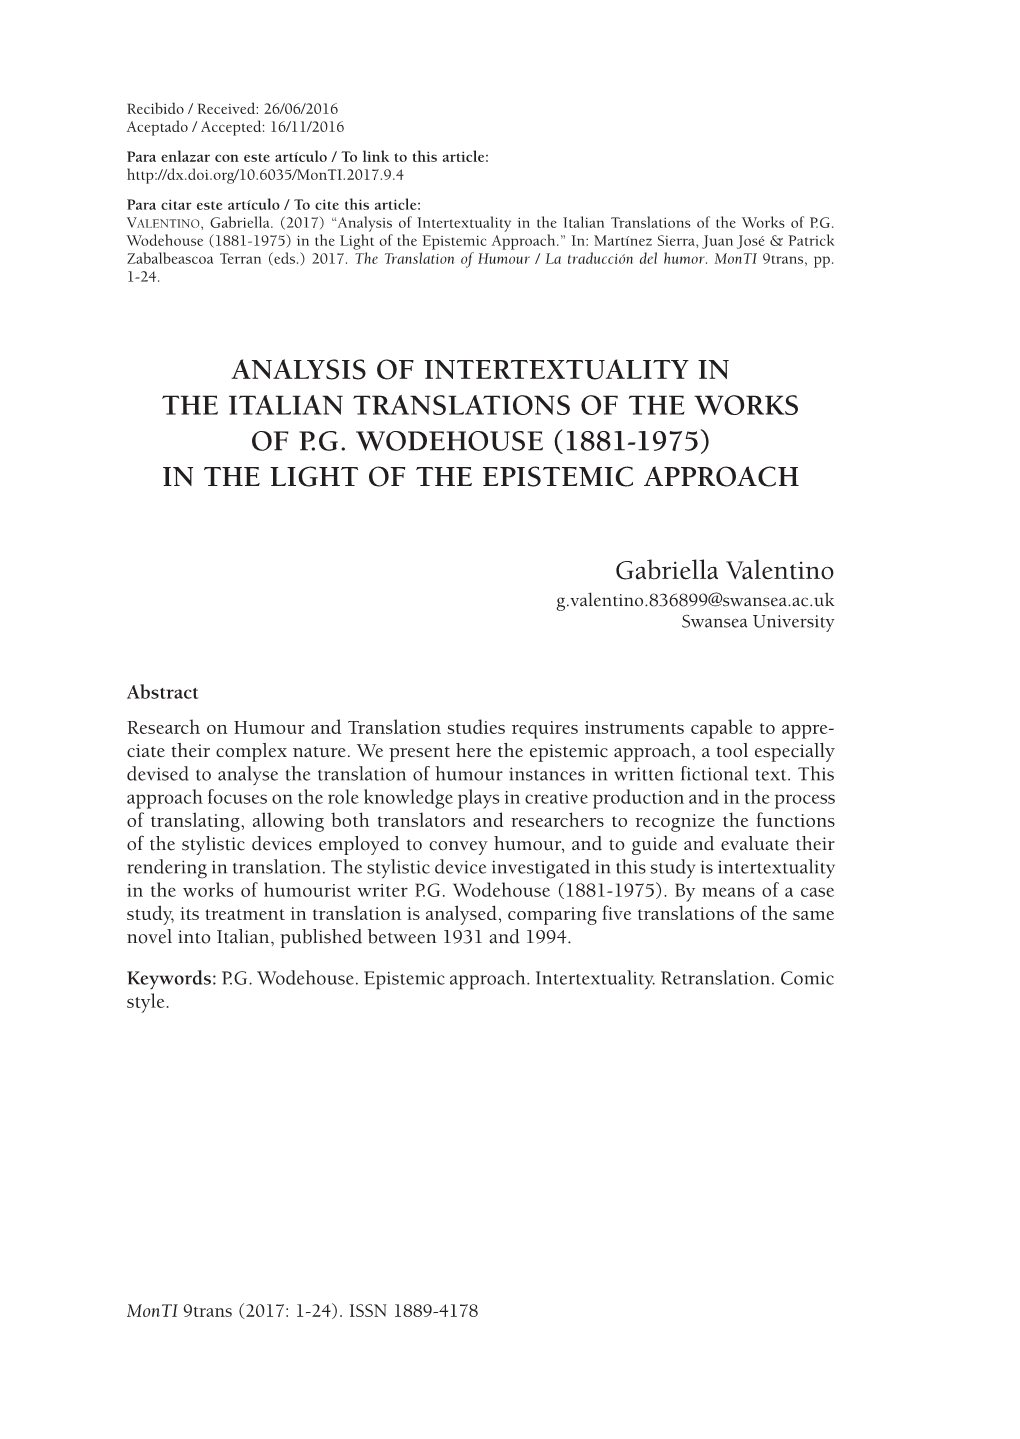 Analysis of Intertextuality in the Italian Translations of the Works of P.G